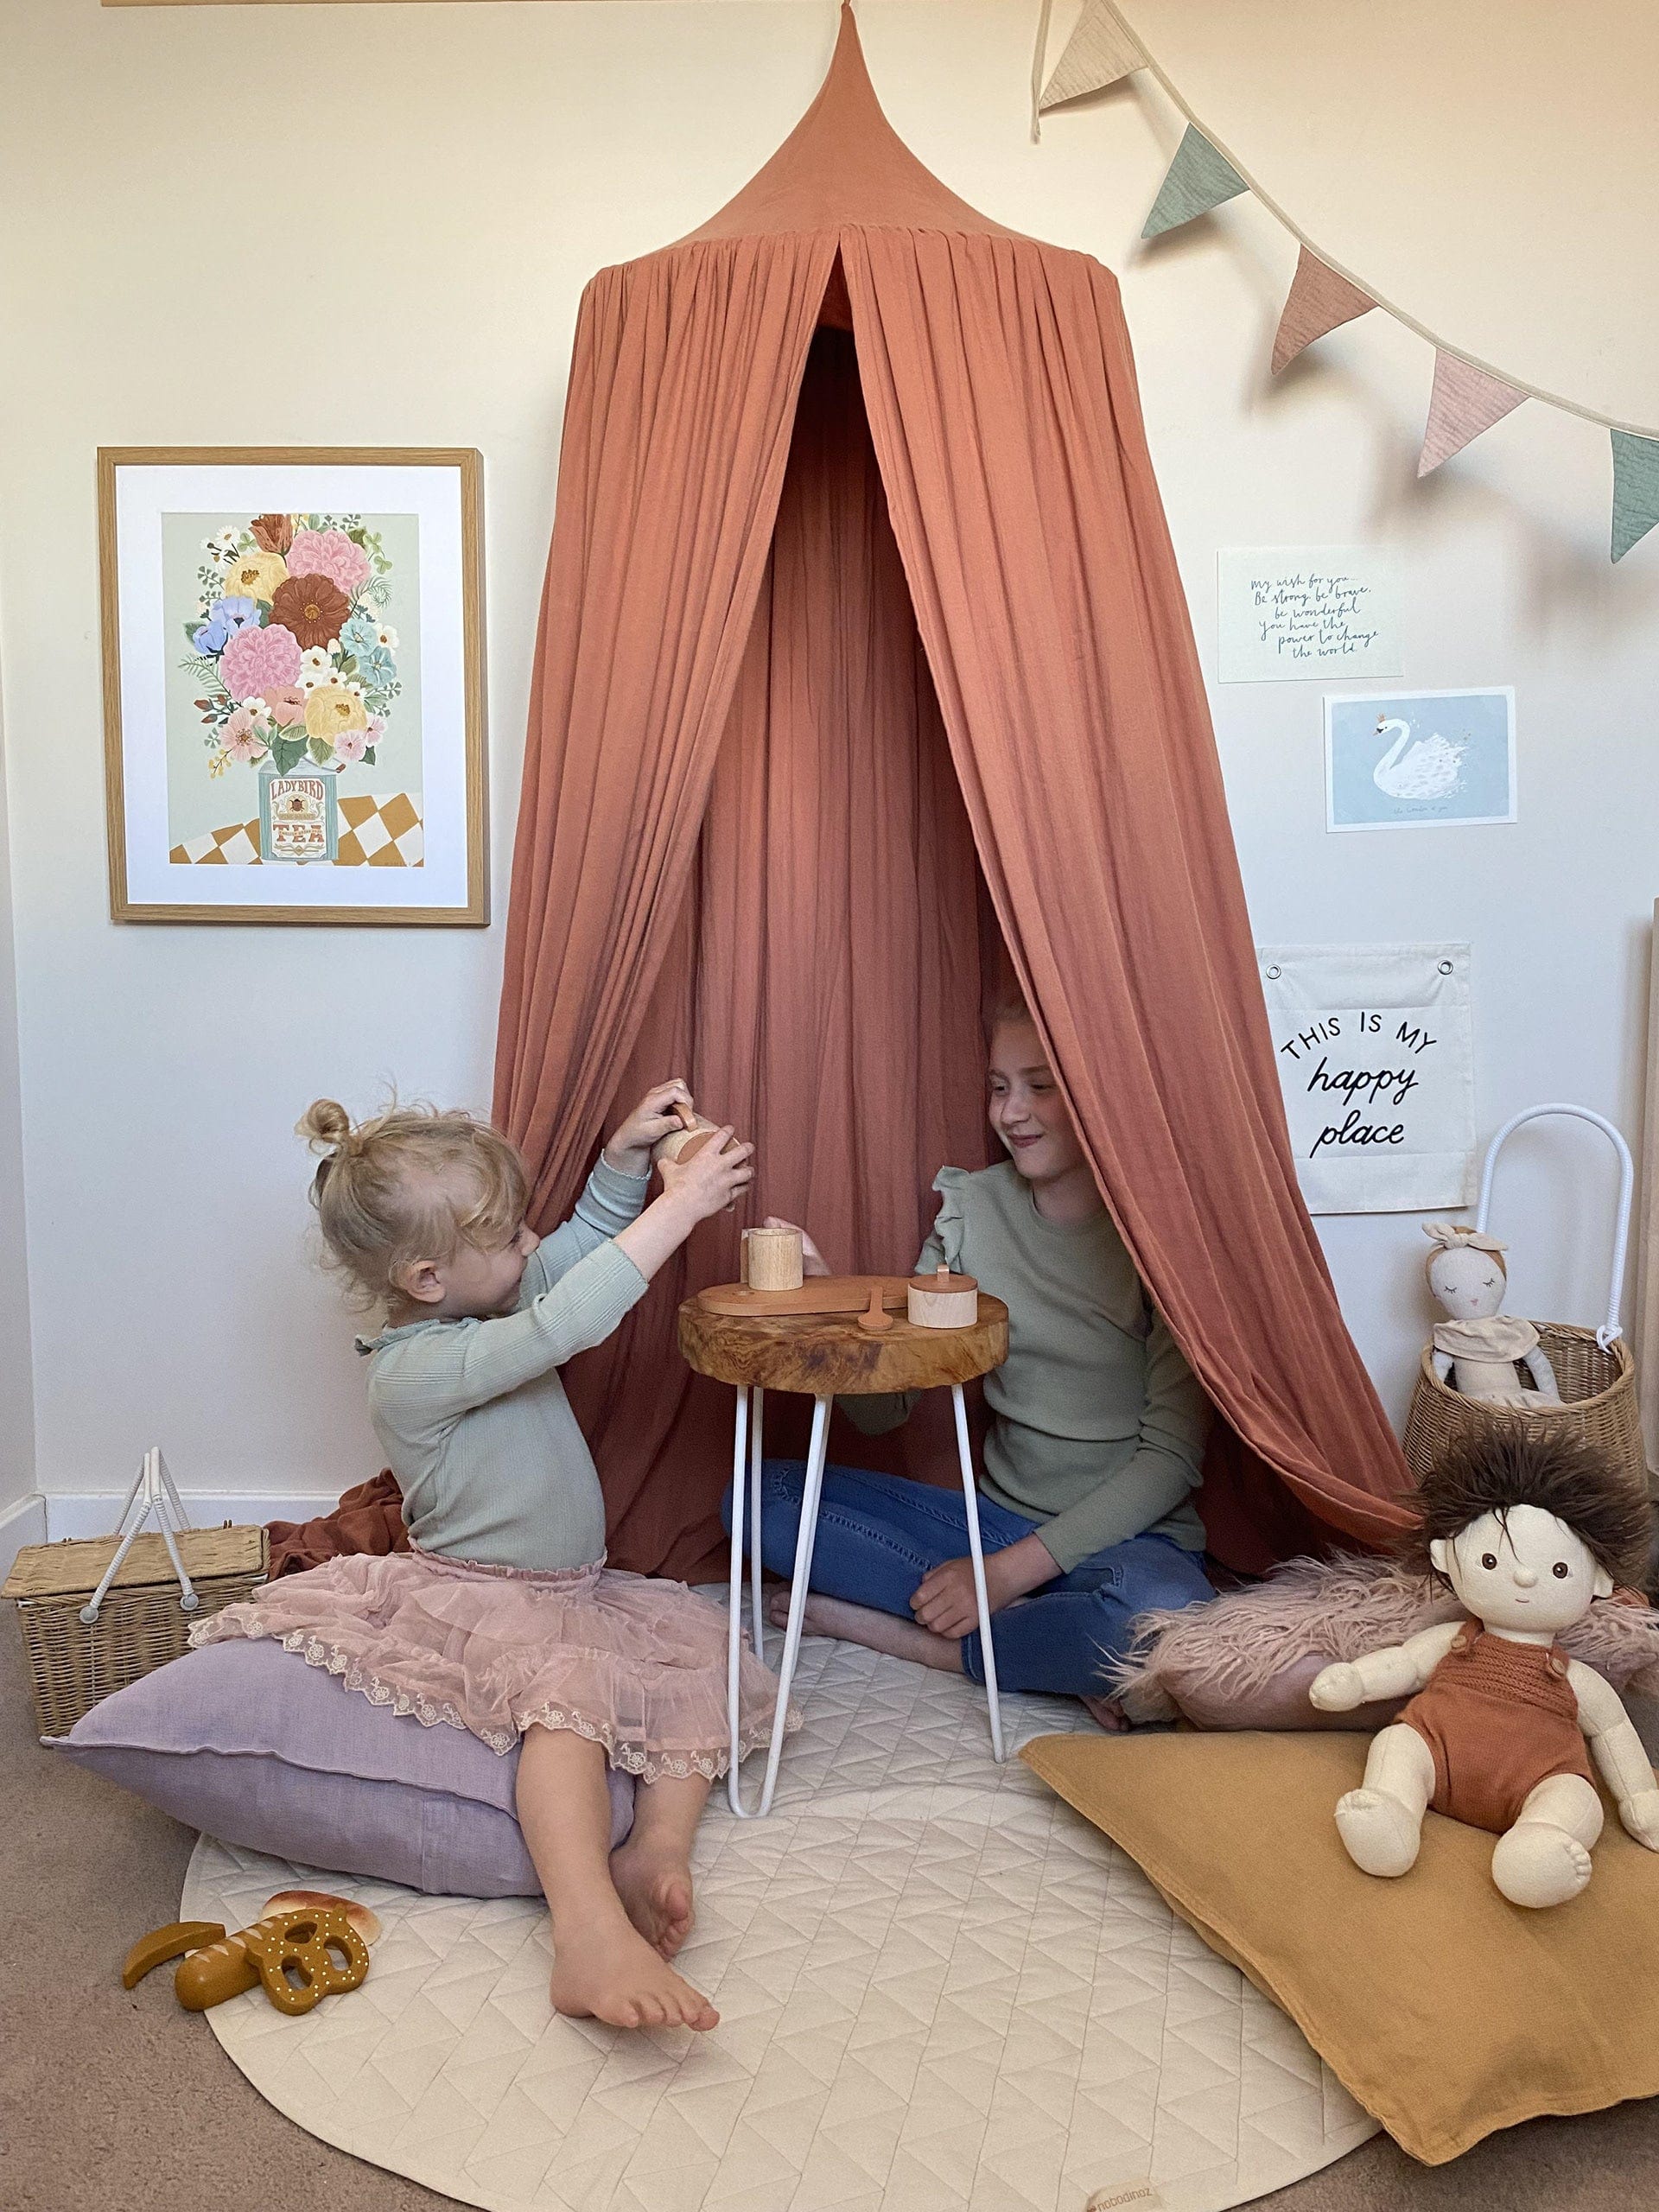 Two girls sitting on floor cushions under a rust coloured canopy, having a tea party with a wooden tea set from liewood and an Olli Ella doll in the foreground with the Boho Floral Vase art print, the wonder of you art print, and my wish for you art print on the wall behind.